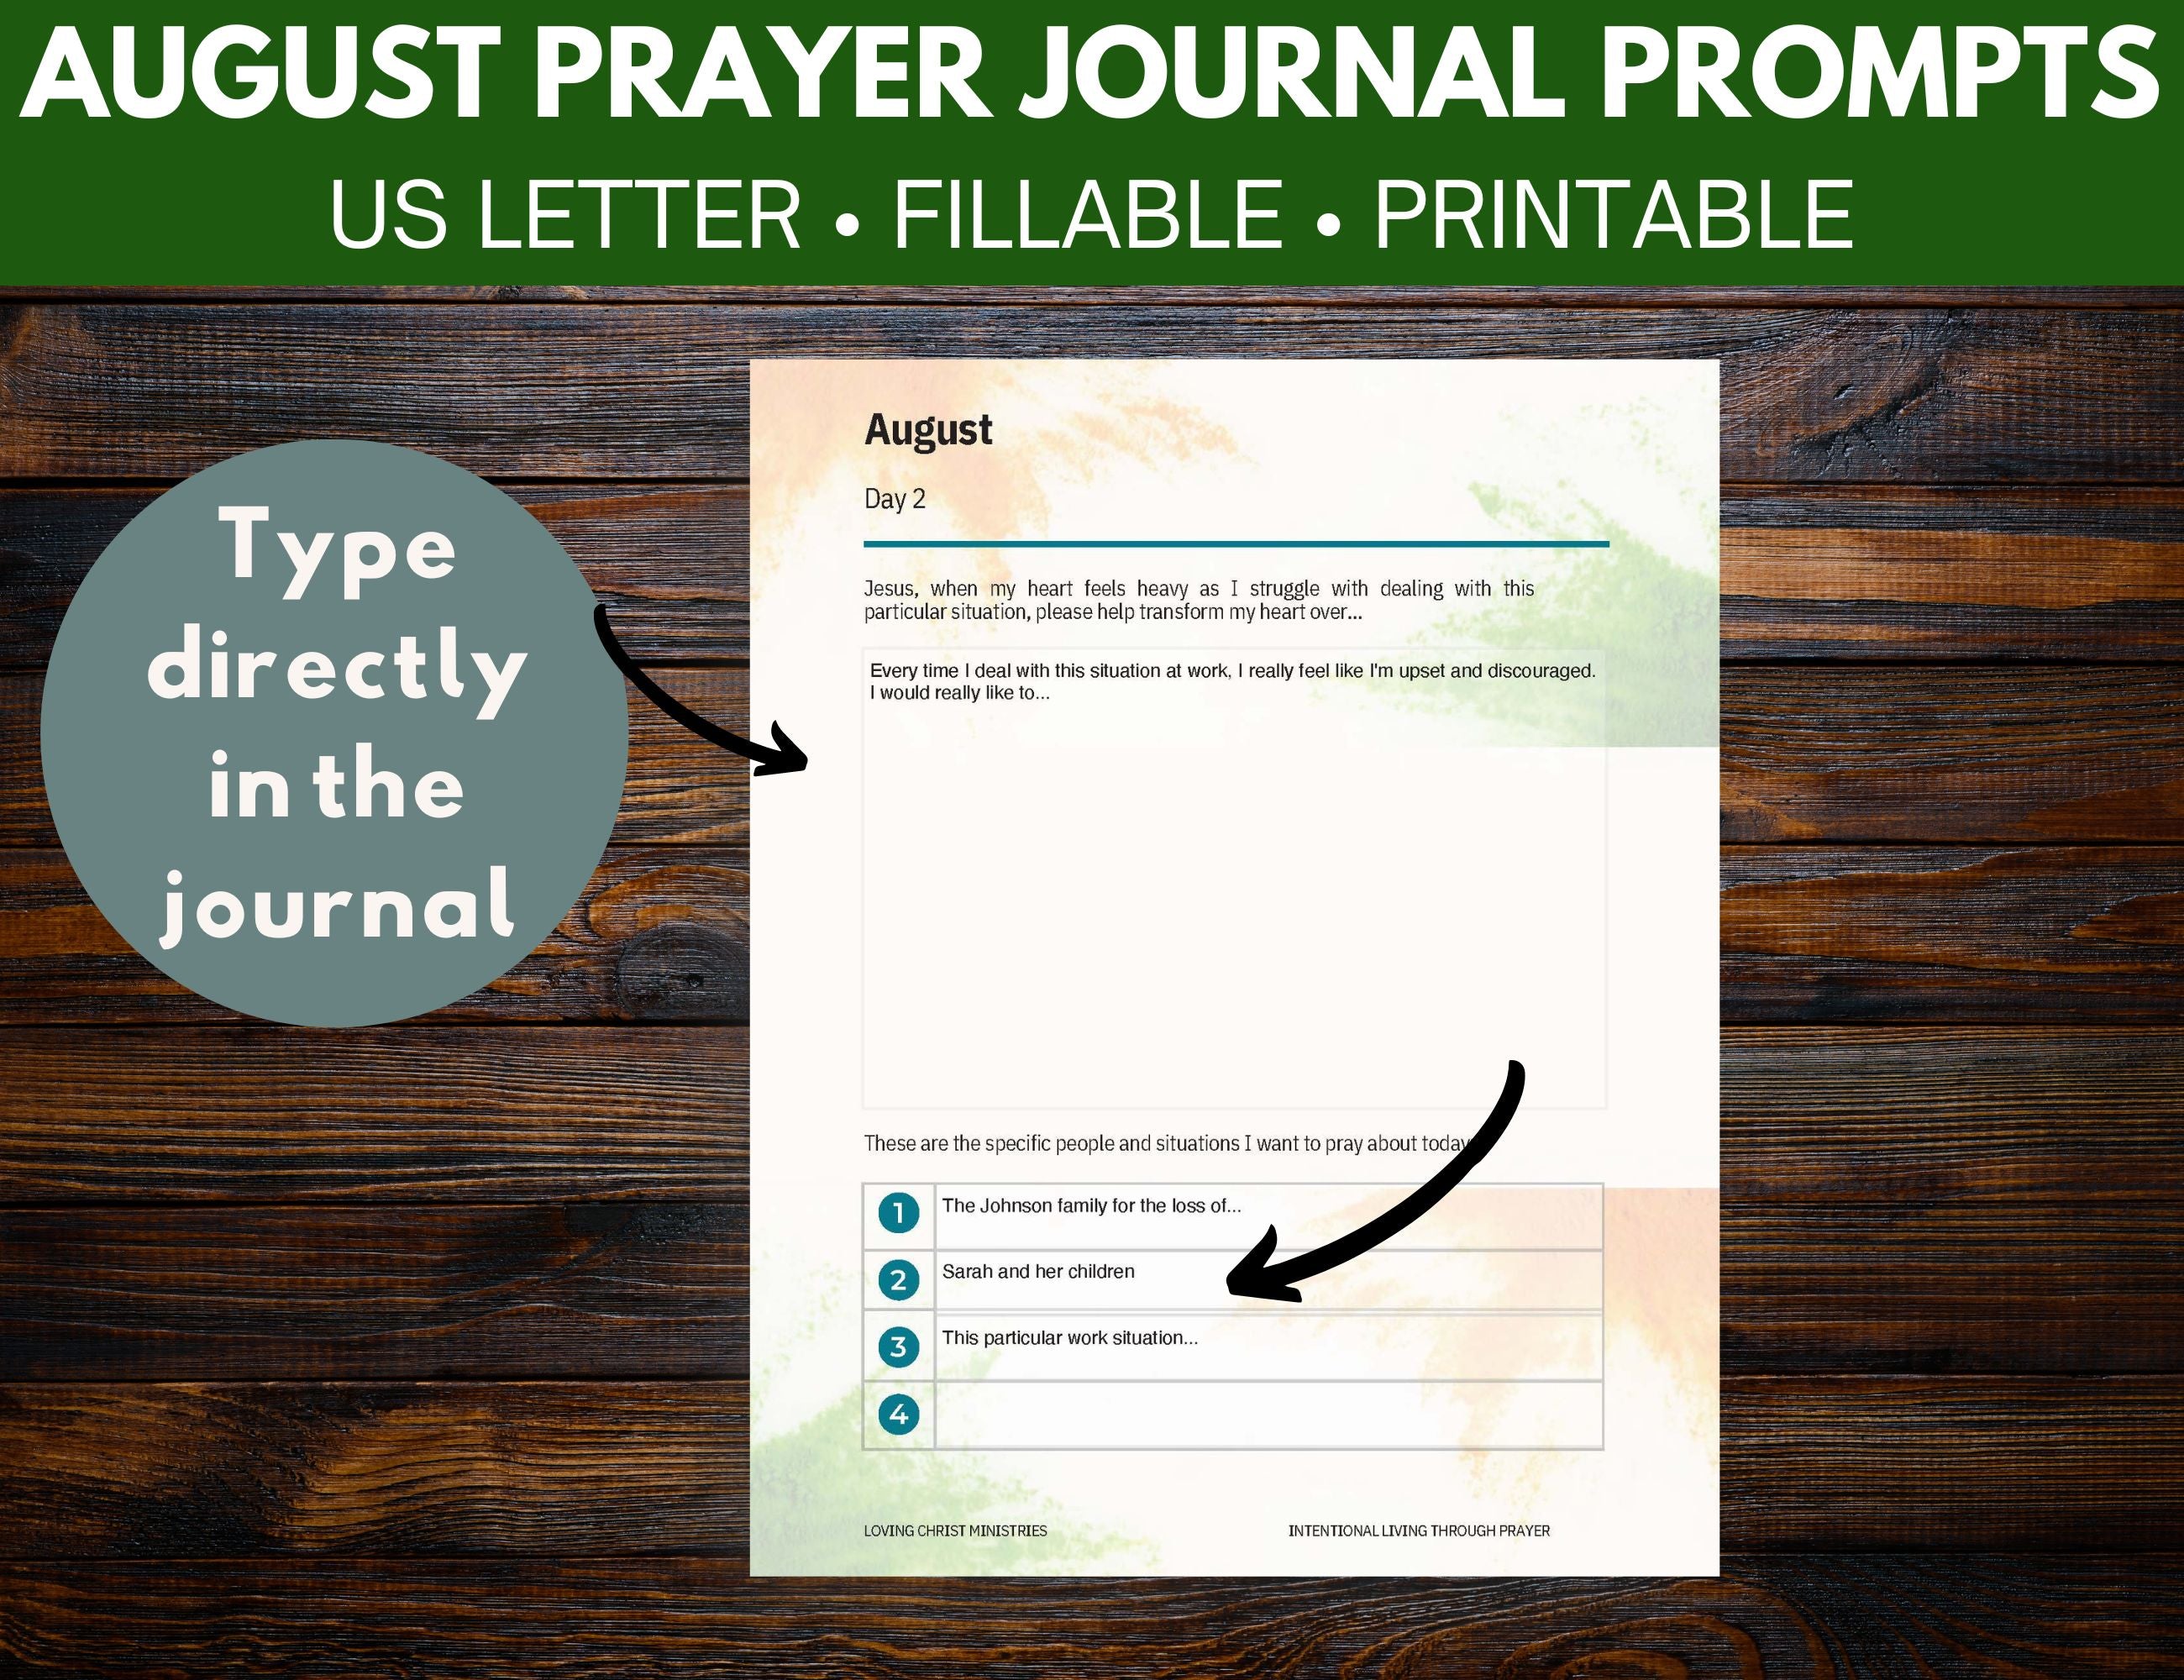 August Prayer Journal Prompts (Fillable)